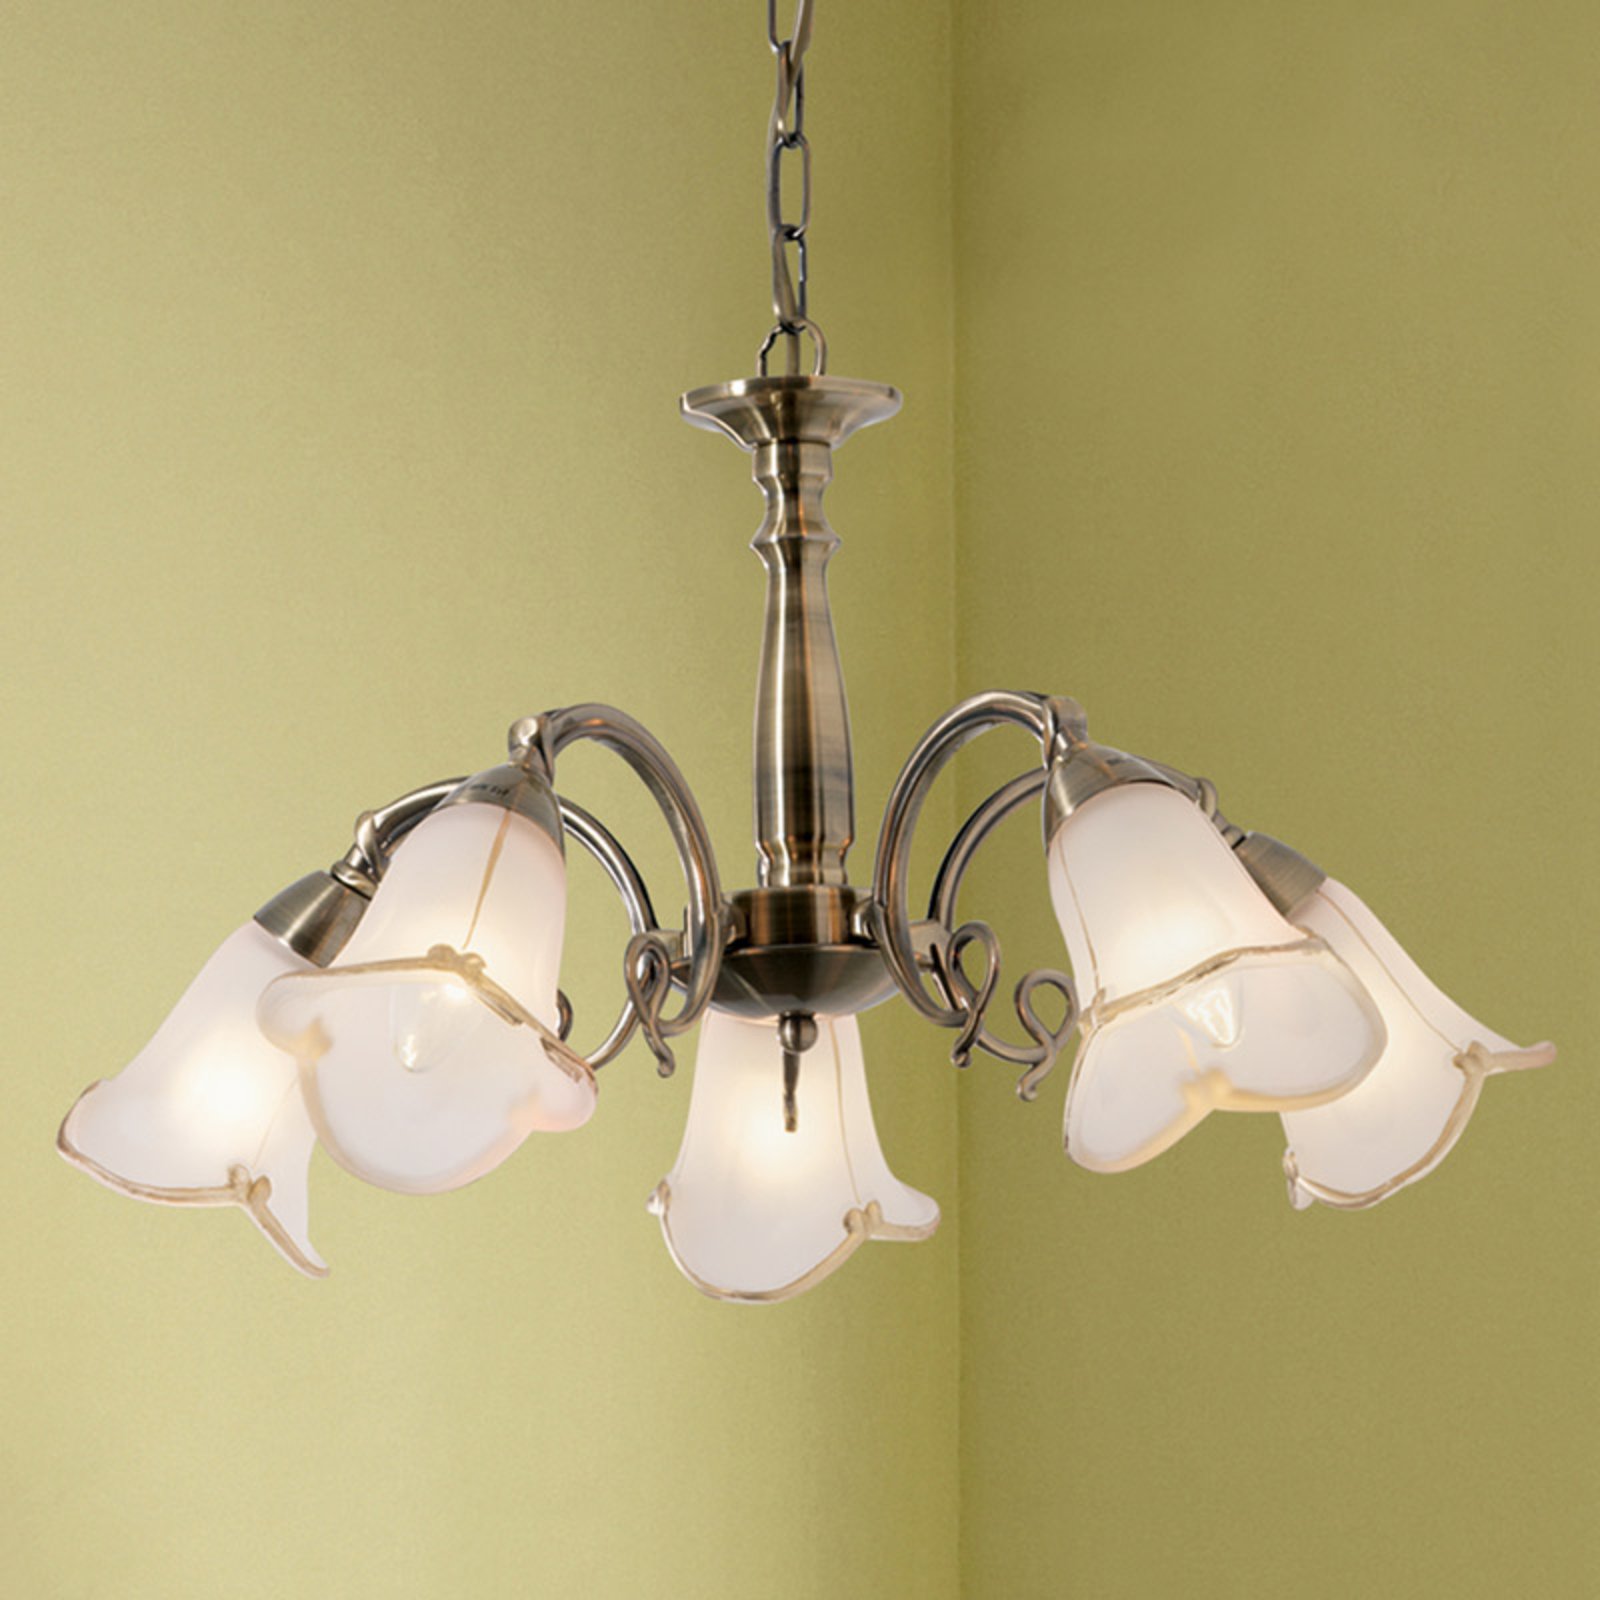 Hanglamp Calla, oudmessing, 5-lamps